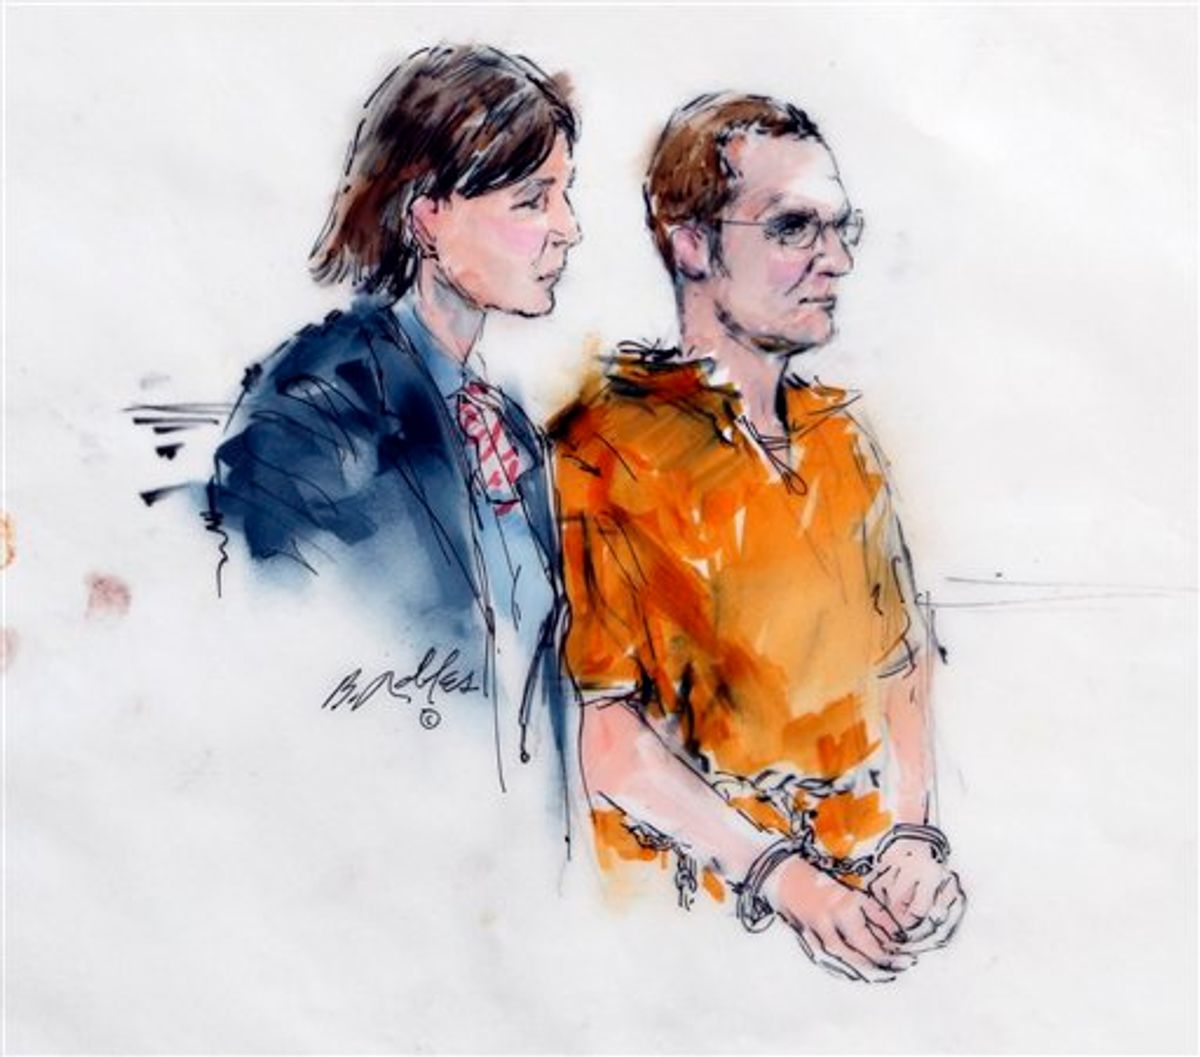 In this artist rendering, Jared Lee Loughner, right, makes a court appearance with his lawyer, Judy Clarke, at the Sandra Day O'Connor United States Courthouse in Phoenix, Ariz., Monday, Jan. 24, 2011. Loughner pled not guilty to charges he tried to kill U.S. Rep. Gabrielle Giffords, D-Ariz, in a shooting rampage that left six people dead. (AP Photo/Bill Robles)   (AP)